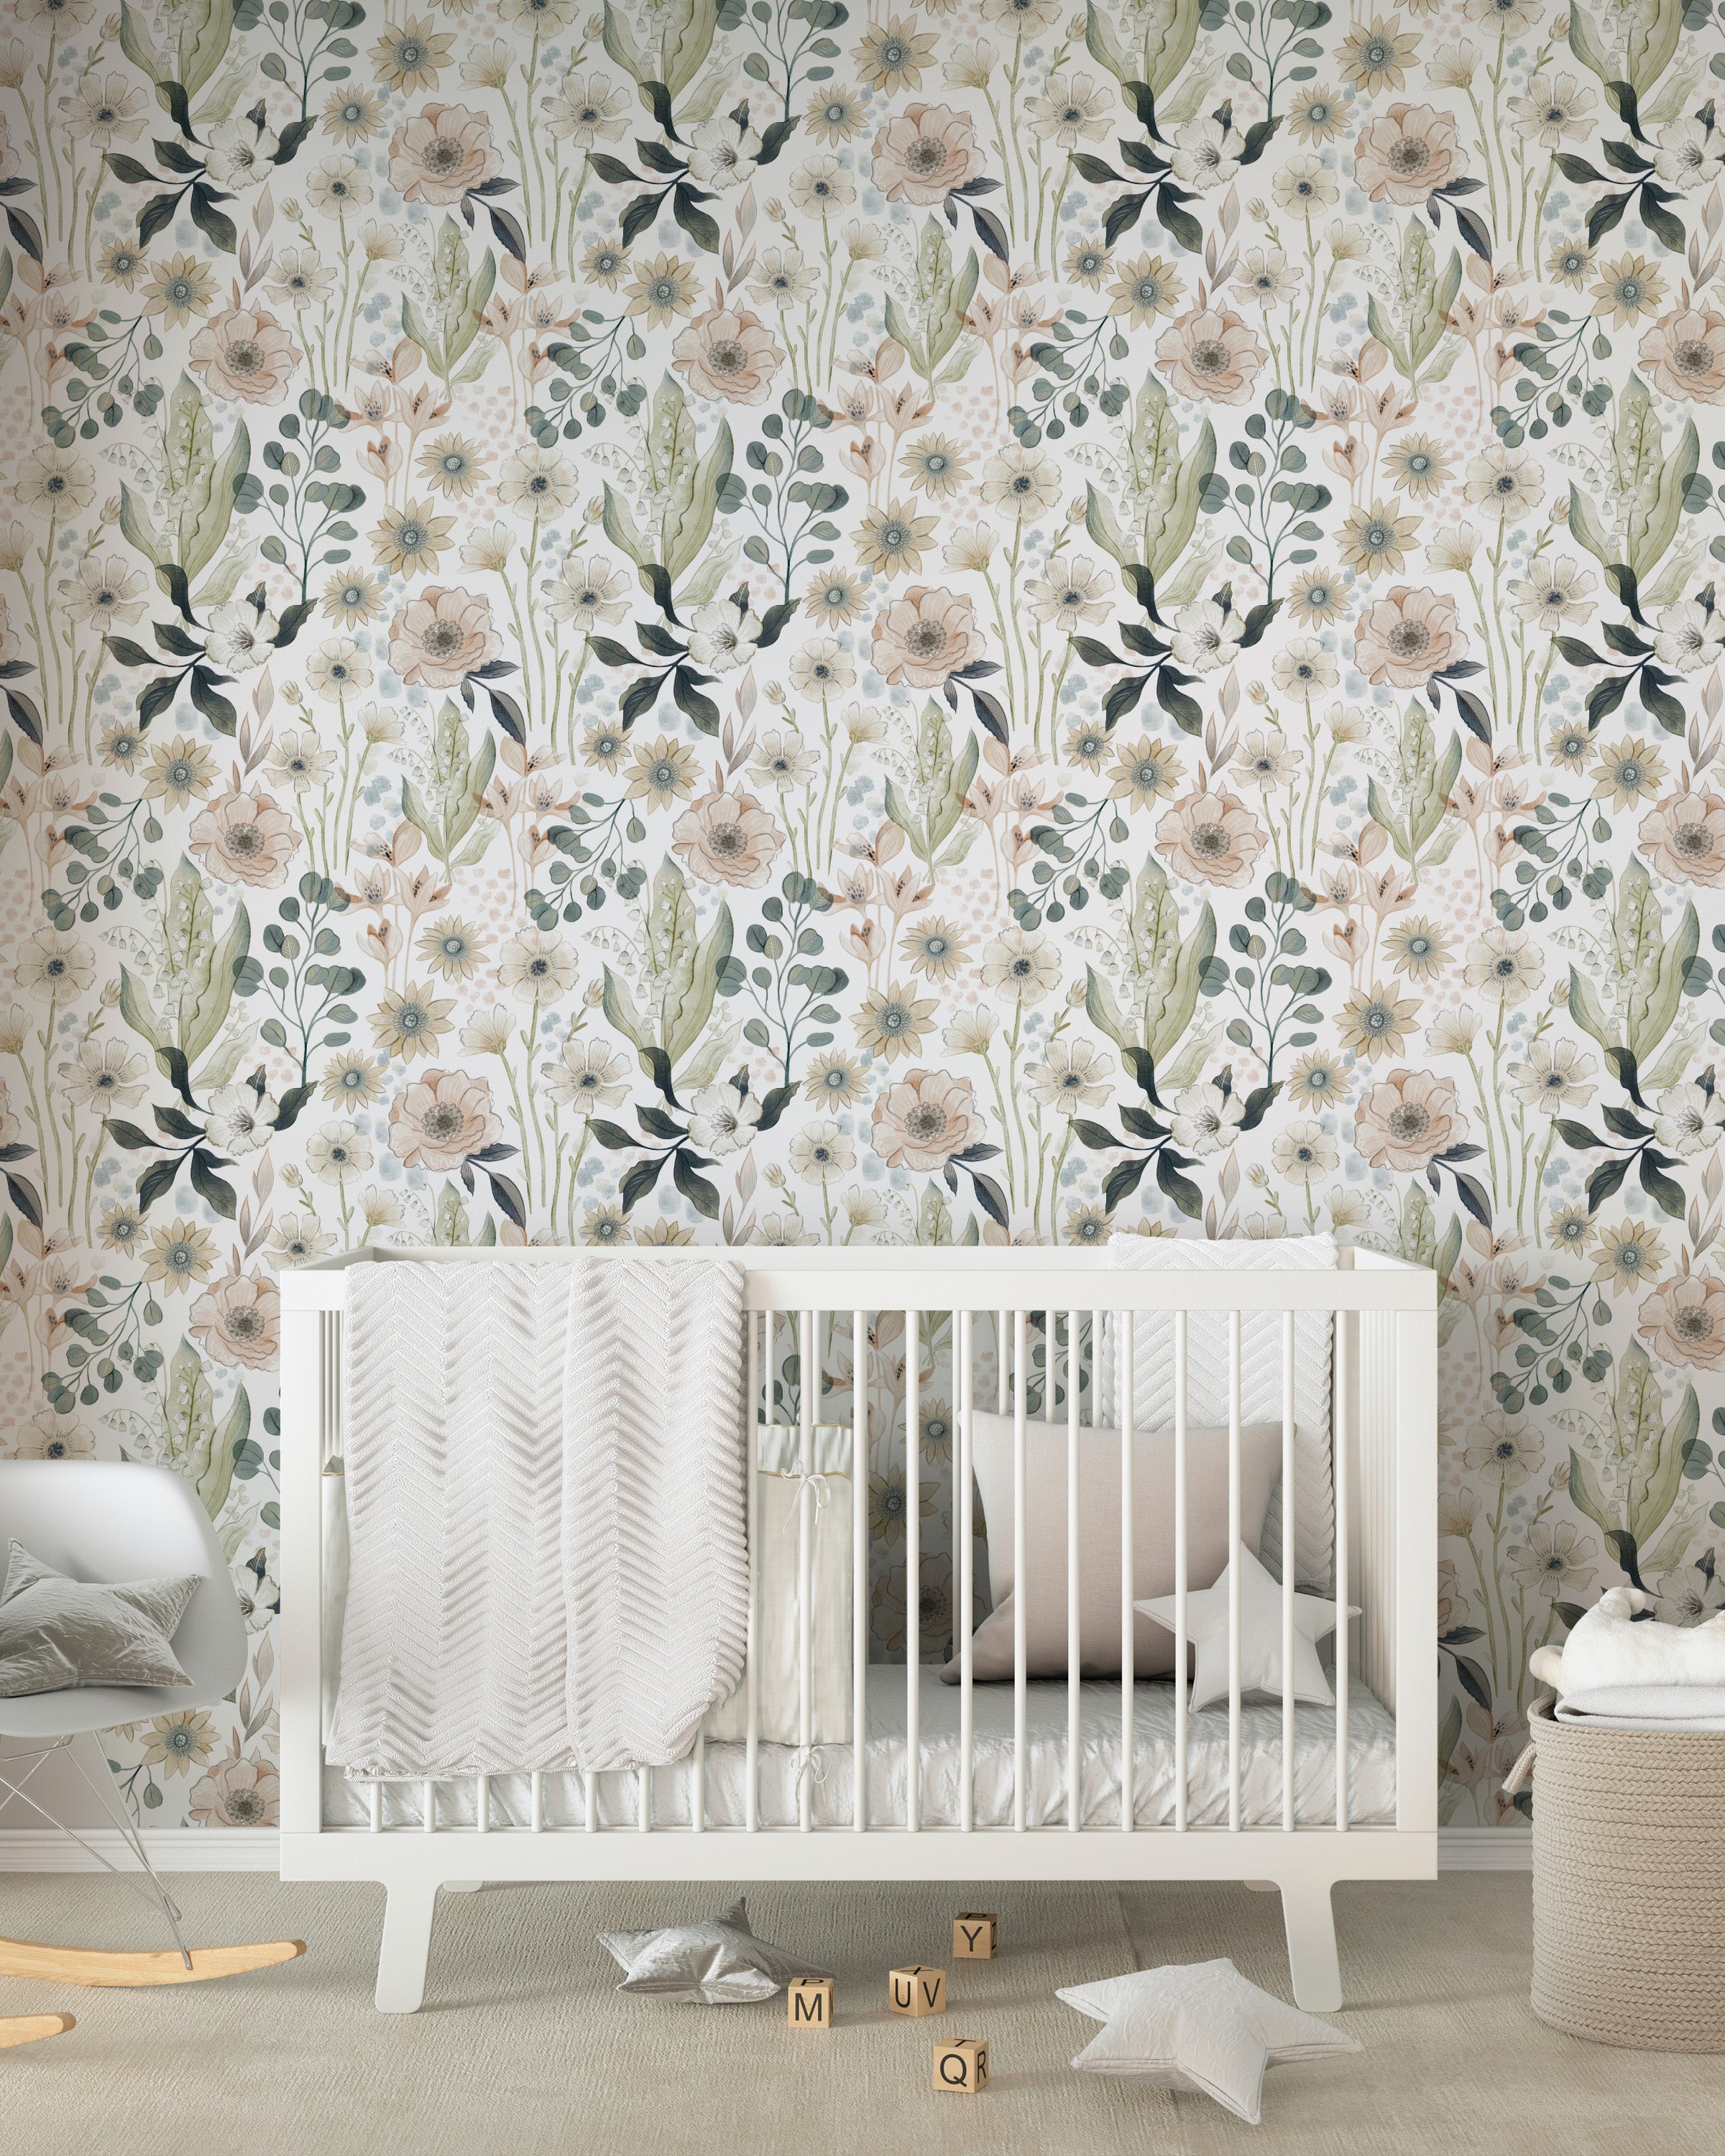 A cozy nursery room featuring a floral wallpaper with a design of large and small flowers in shades of beige, cream, blue, and green. The room includes a white crib with a soft gray blanket and a pillow, wooden blocks on the floor, and a round storage basket nearby.